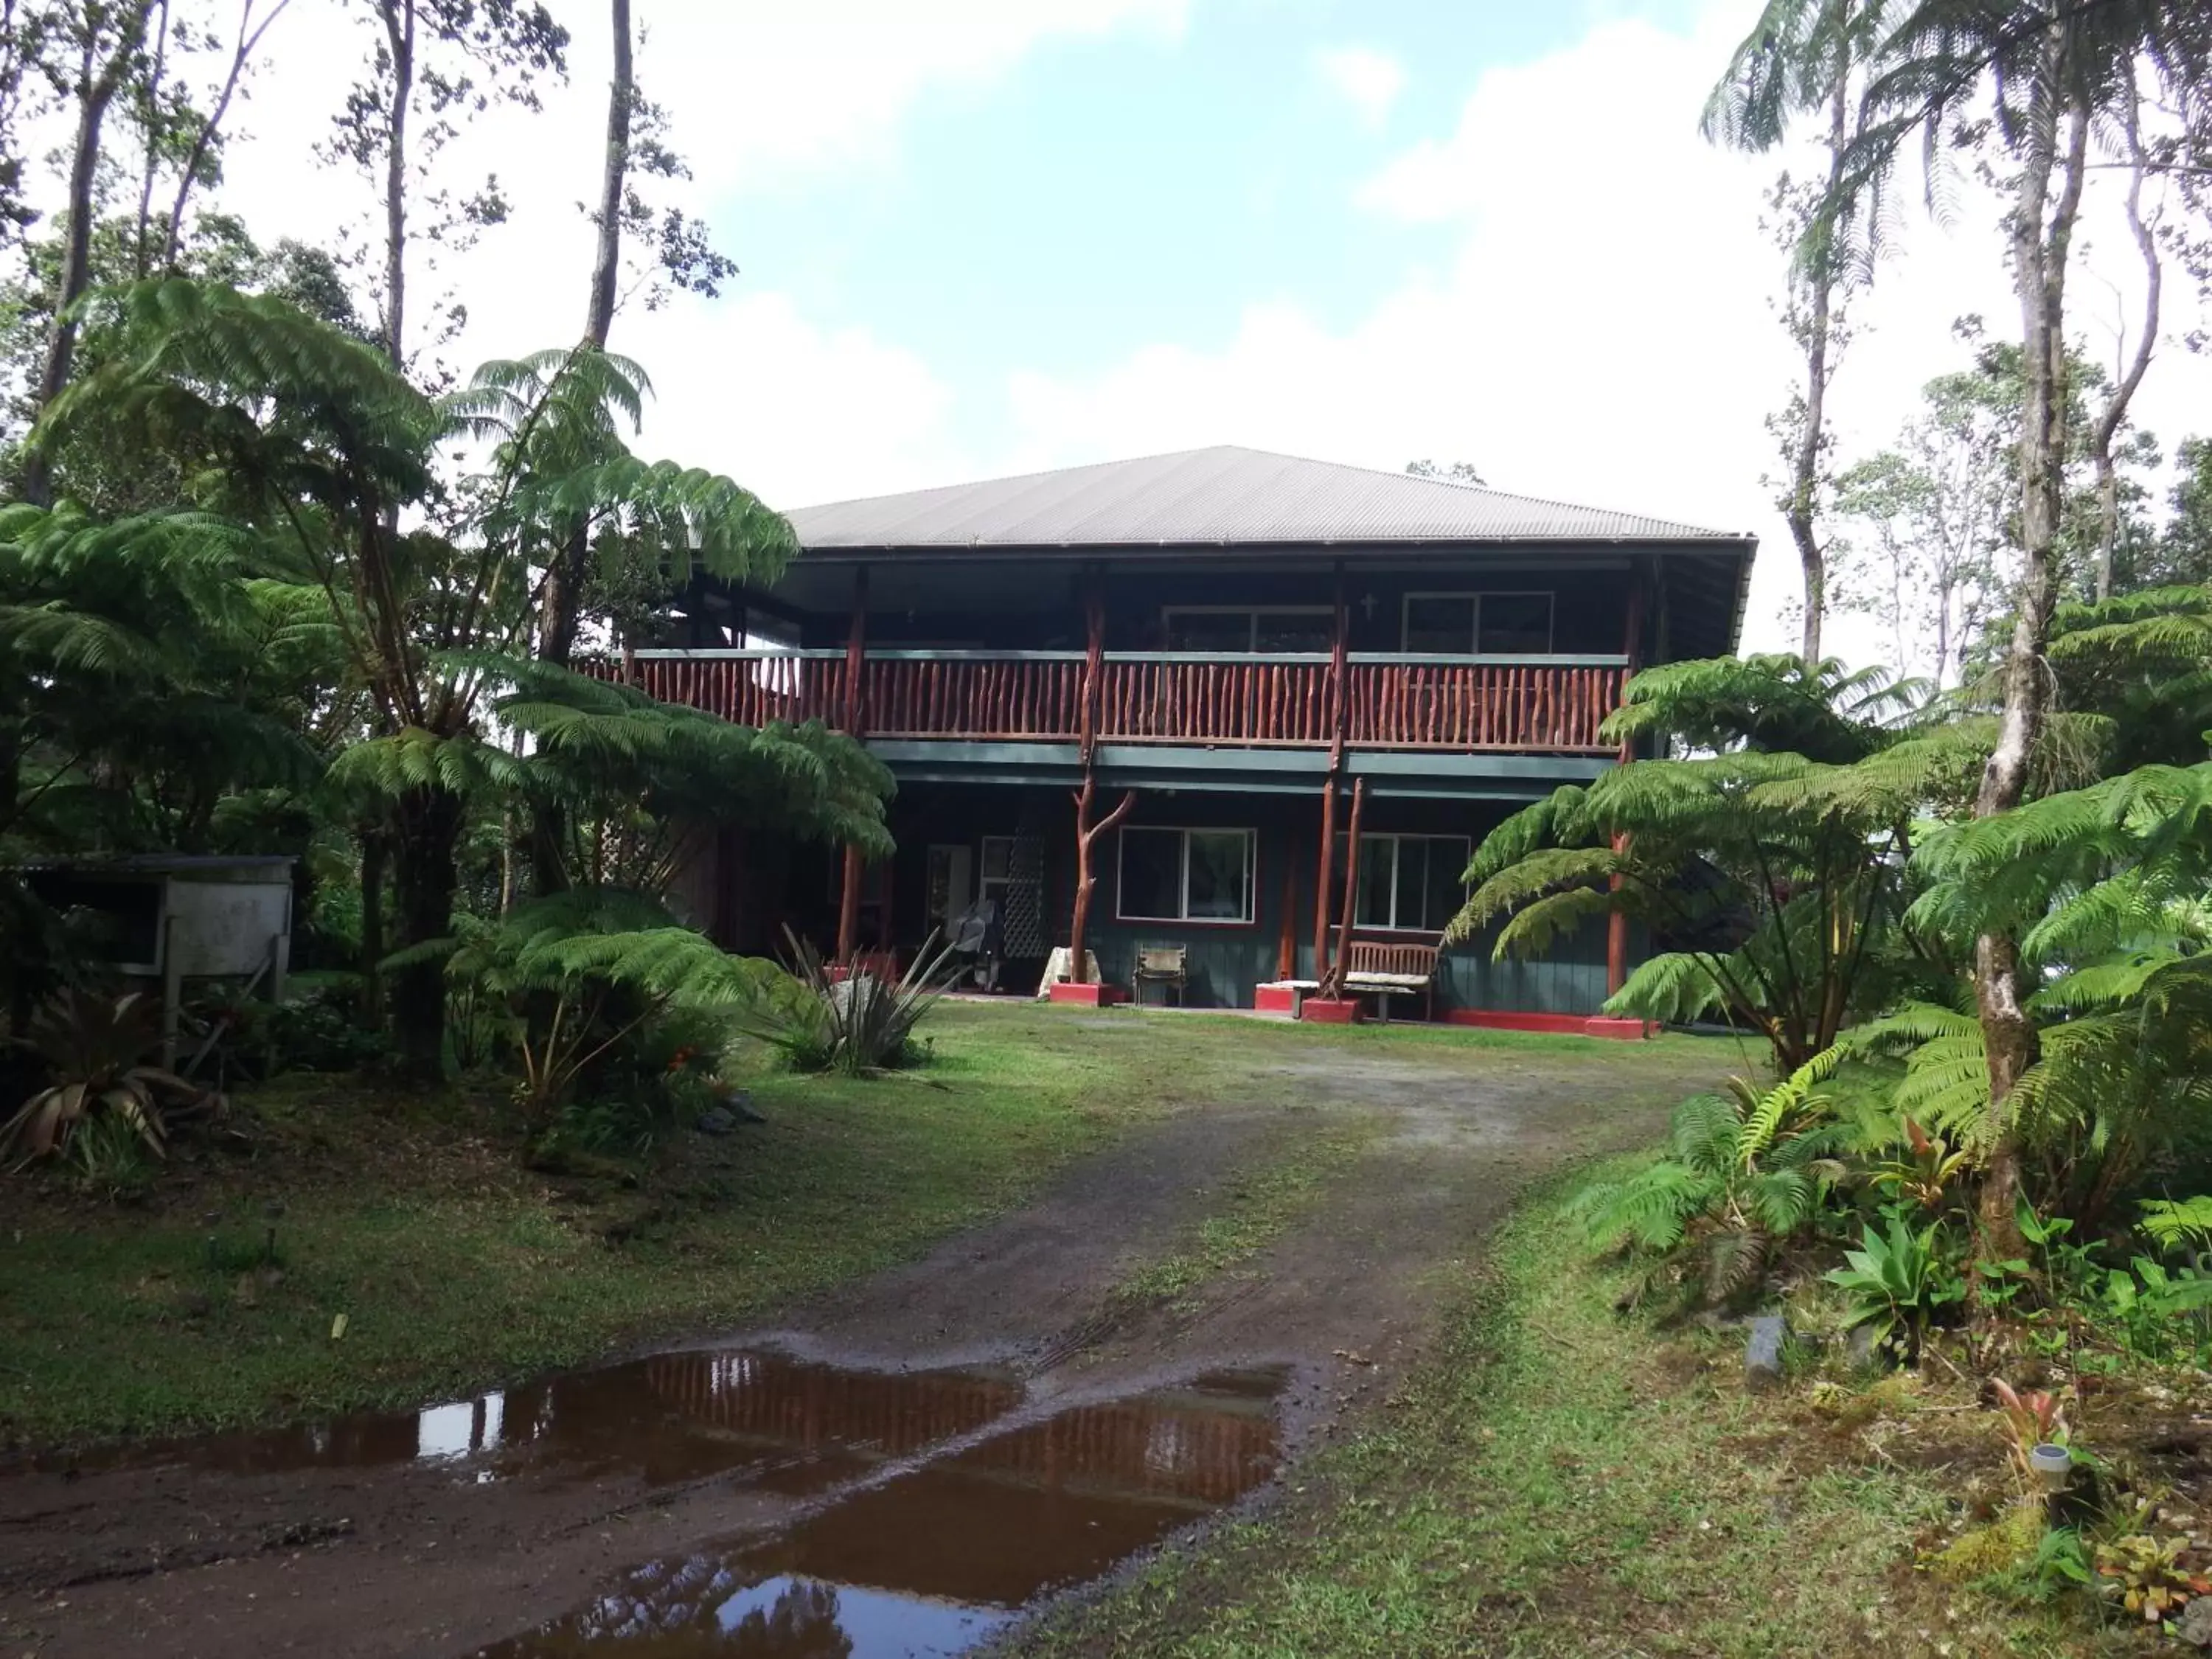 Property Building in Aloha Crater Lodge